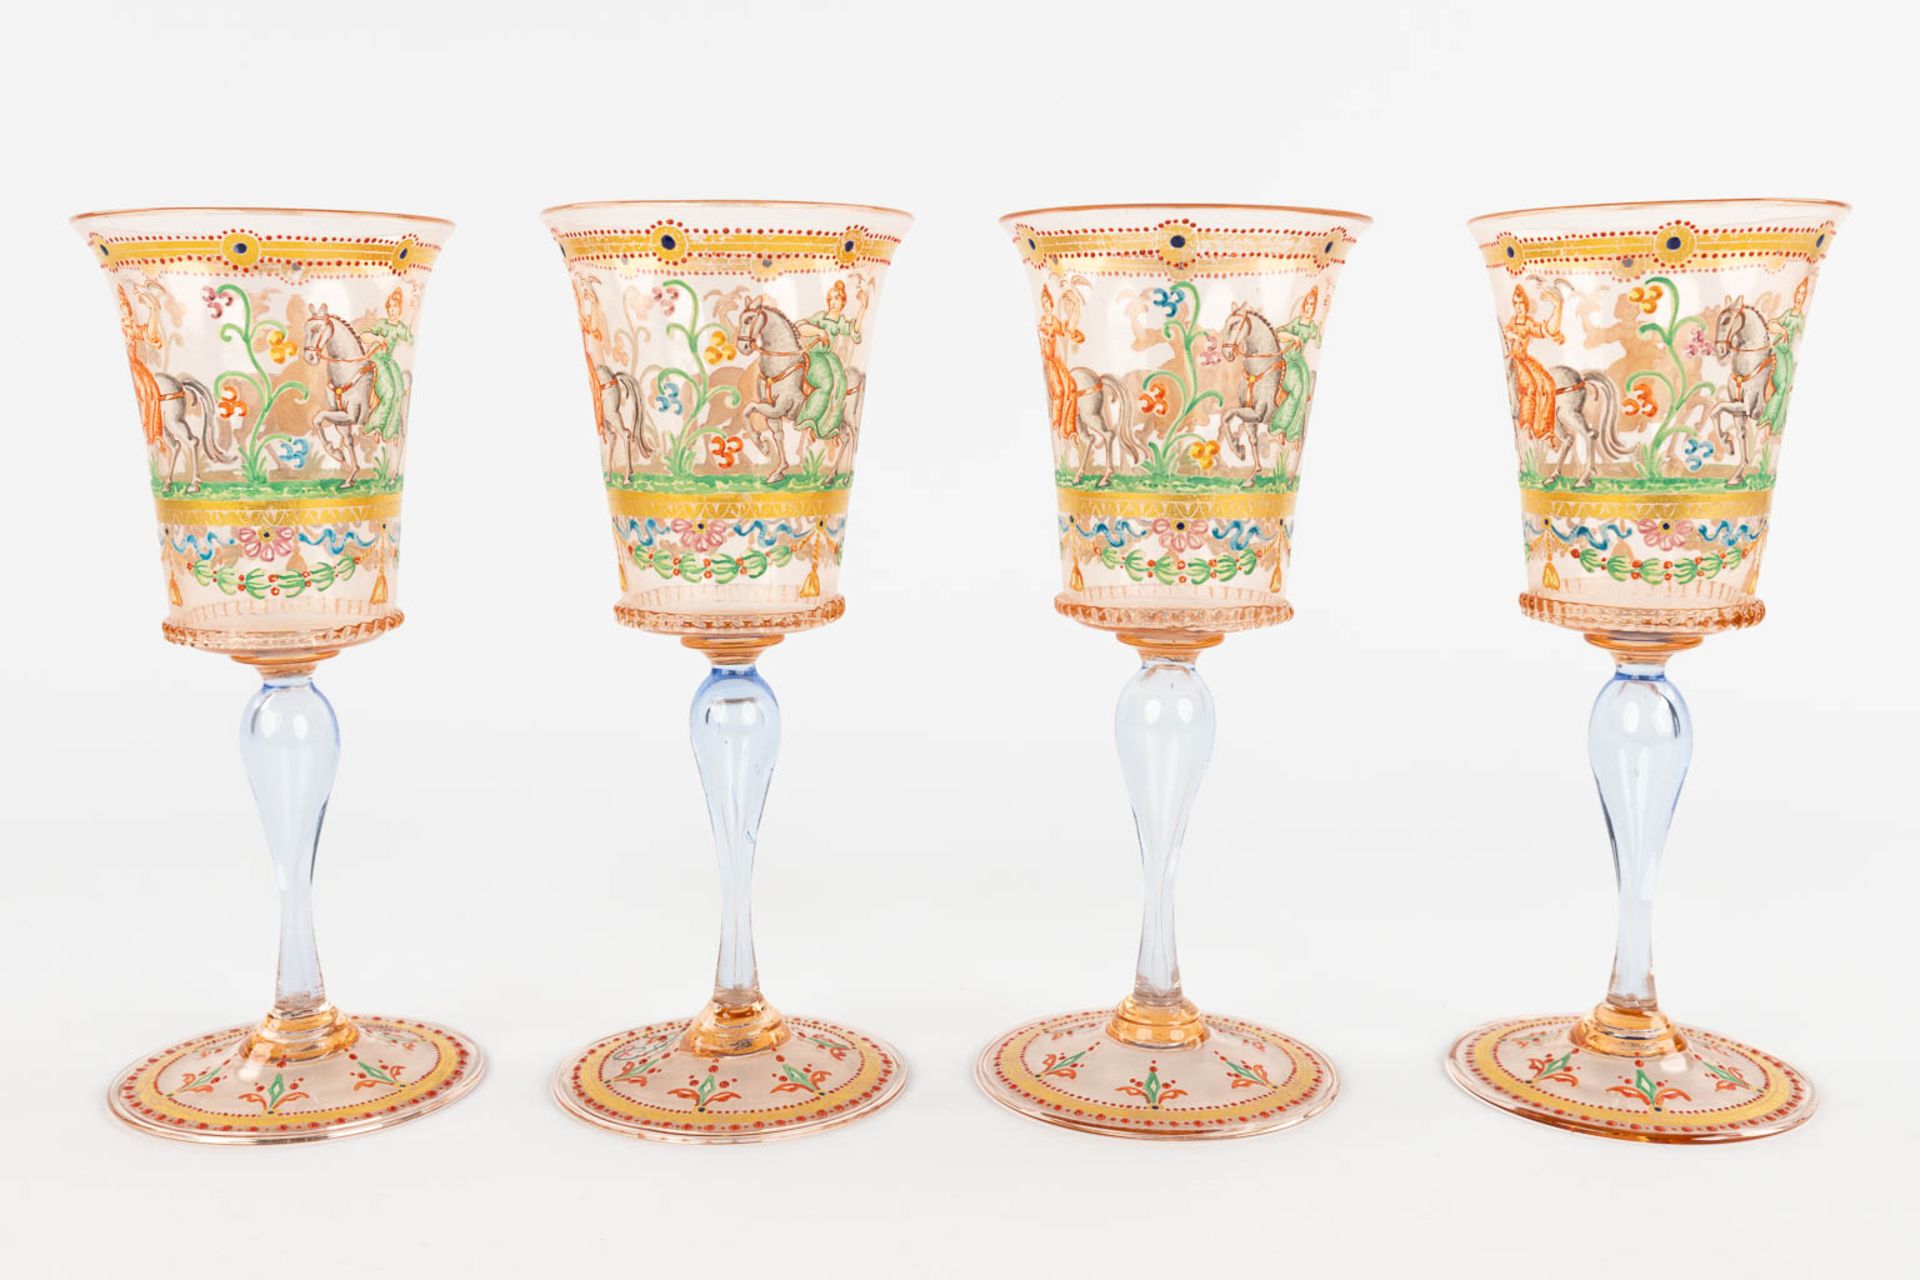 A set of 4 hand-painted and antique goblets, Murano, Salviati, 19th C. (H:17 x D:7 cm) - Image 7 of 16